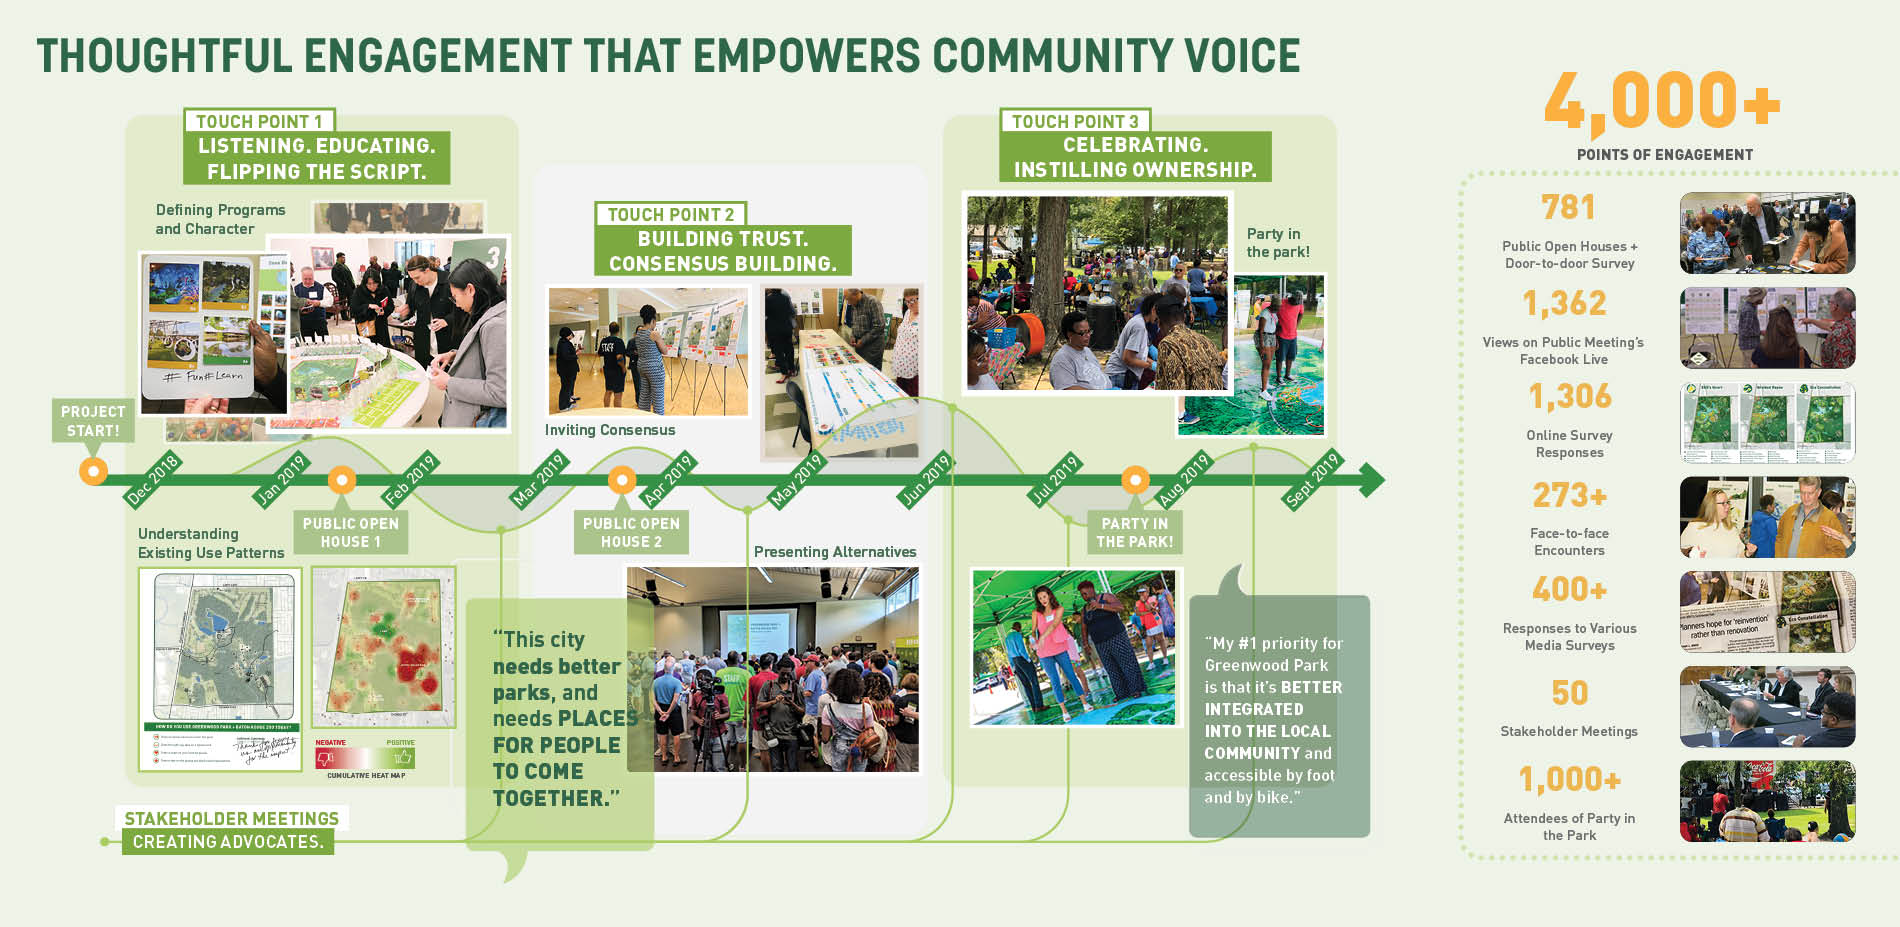 Thoughtful Engagement that Empowers Community Voice